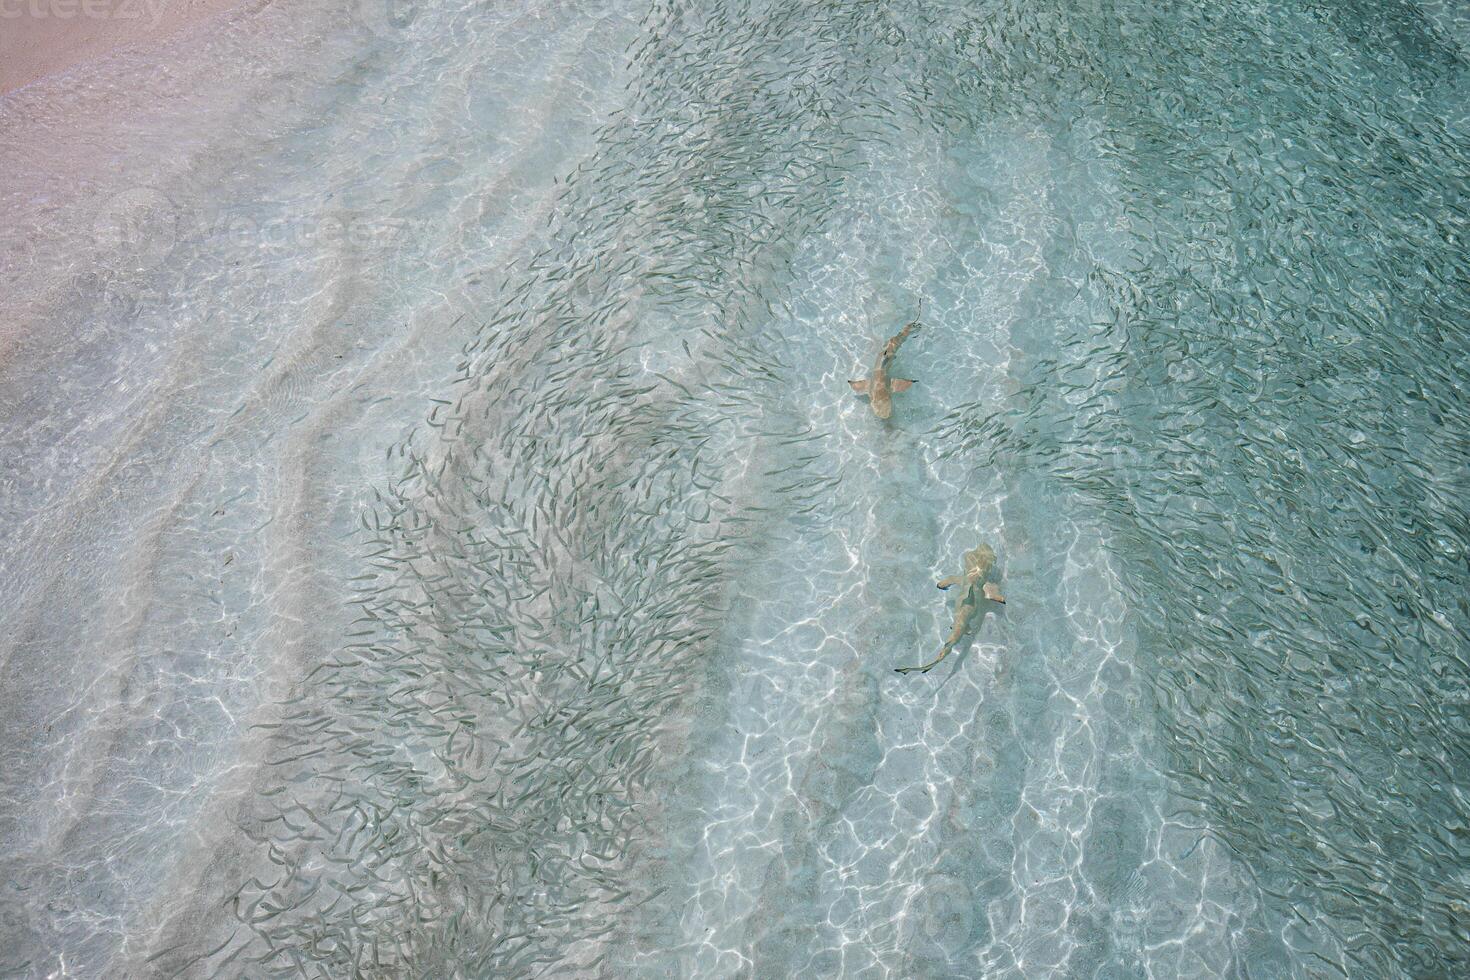 Blacktip Reef Shark hunting for fish. Sea life ecosystem. Wild baby black tip reef shark from above in tropical clear waters school of fish in shallow lagoon turquoise marine aqua background wallpaper photo